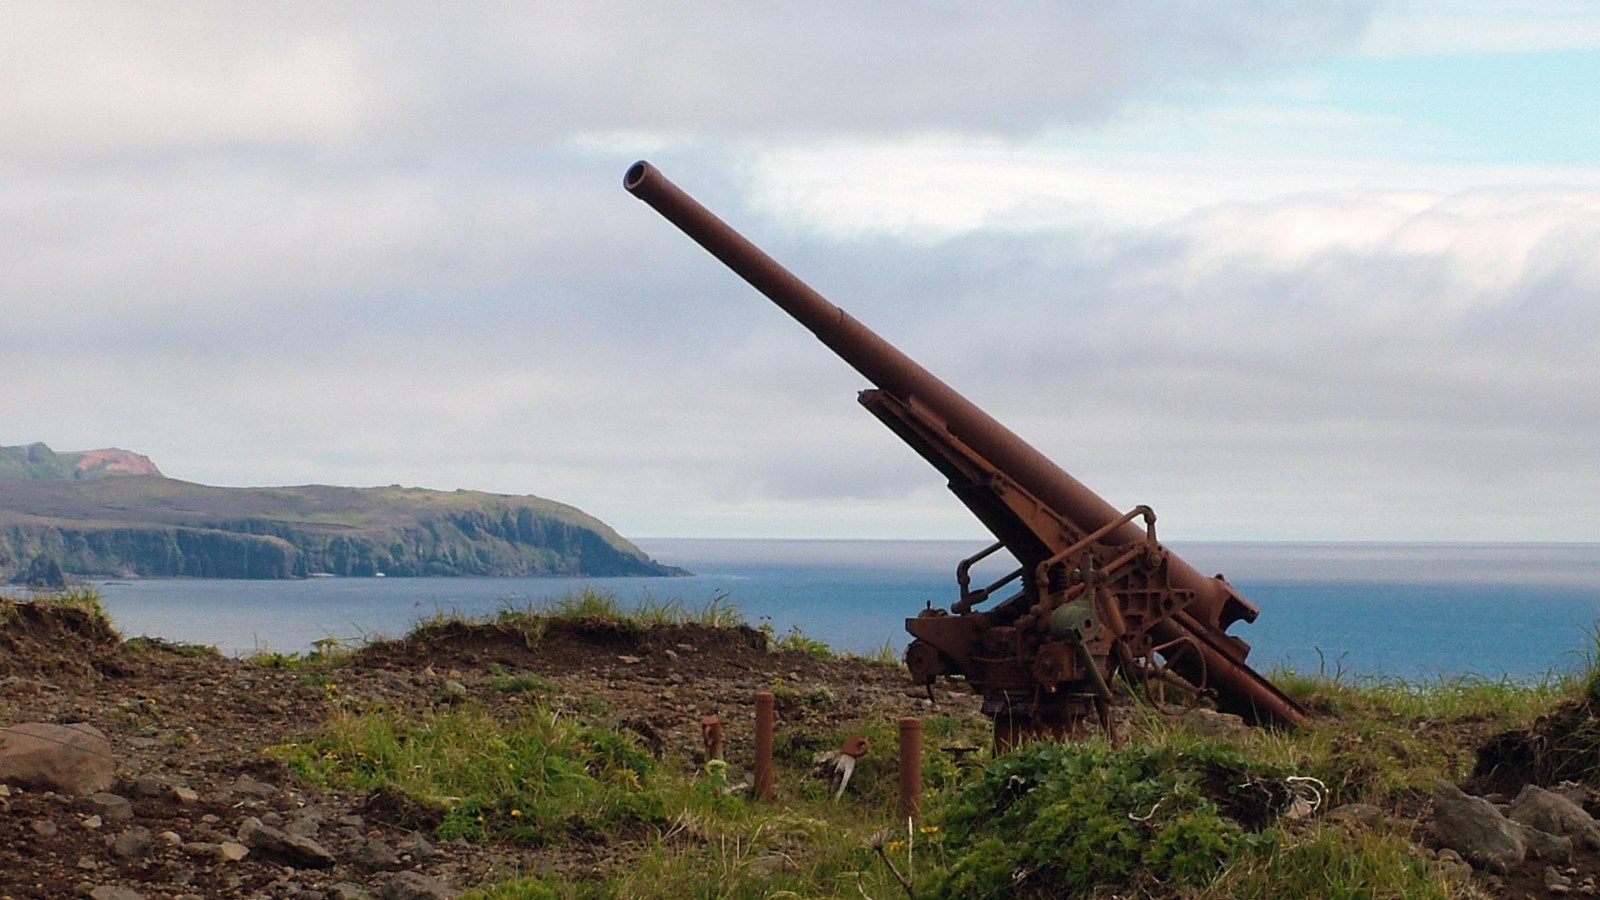 A large rusty 75 mm gun on the tundra with the ocean on the horizon.